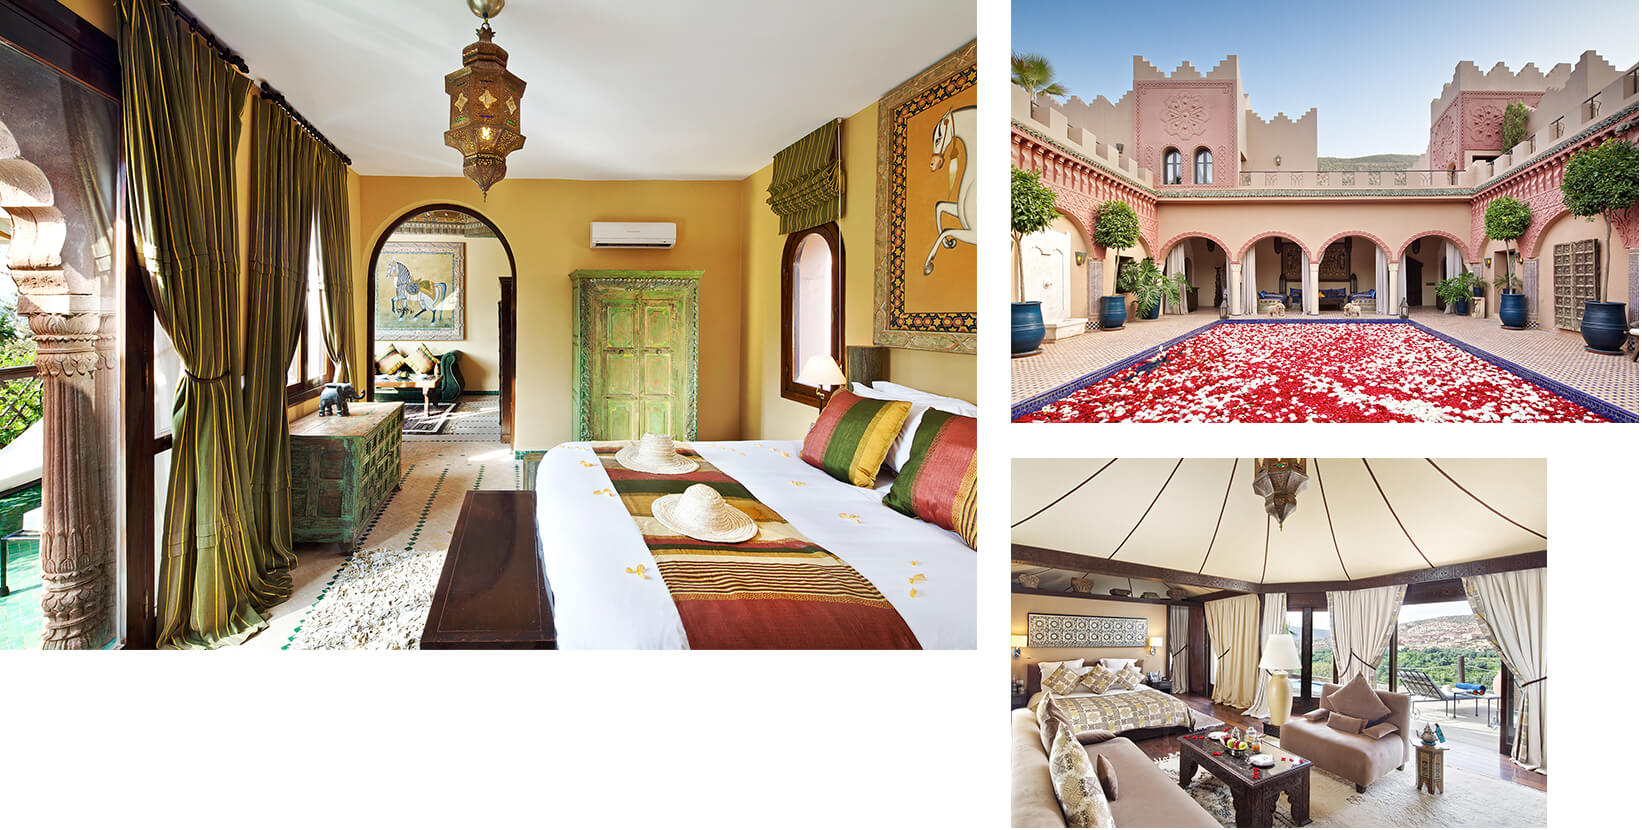 The Perfect Week in Marrakech